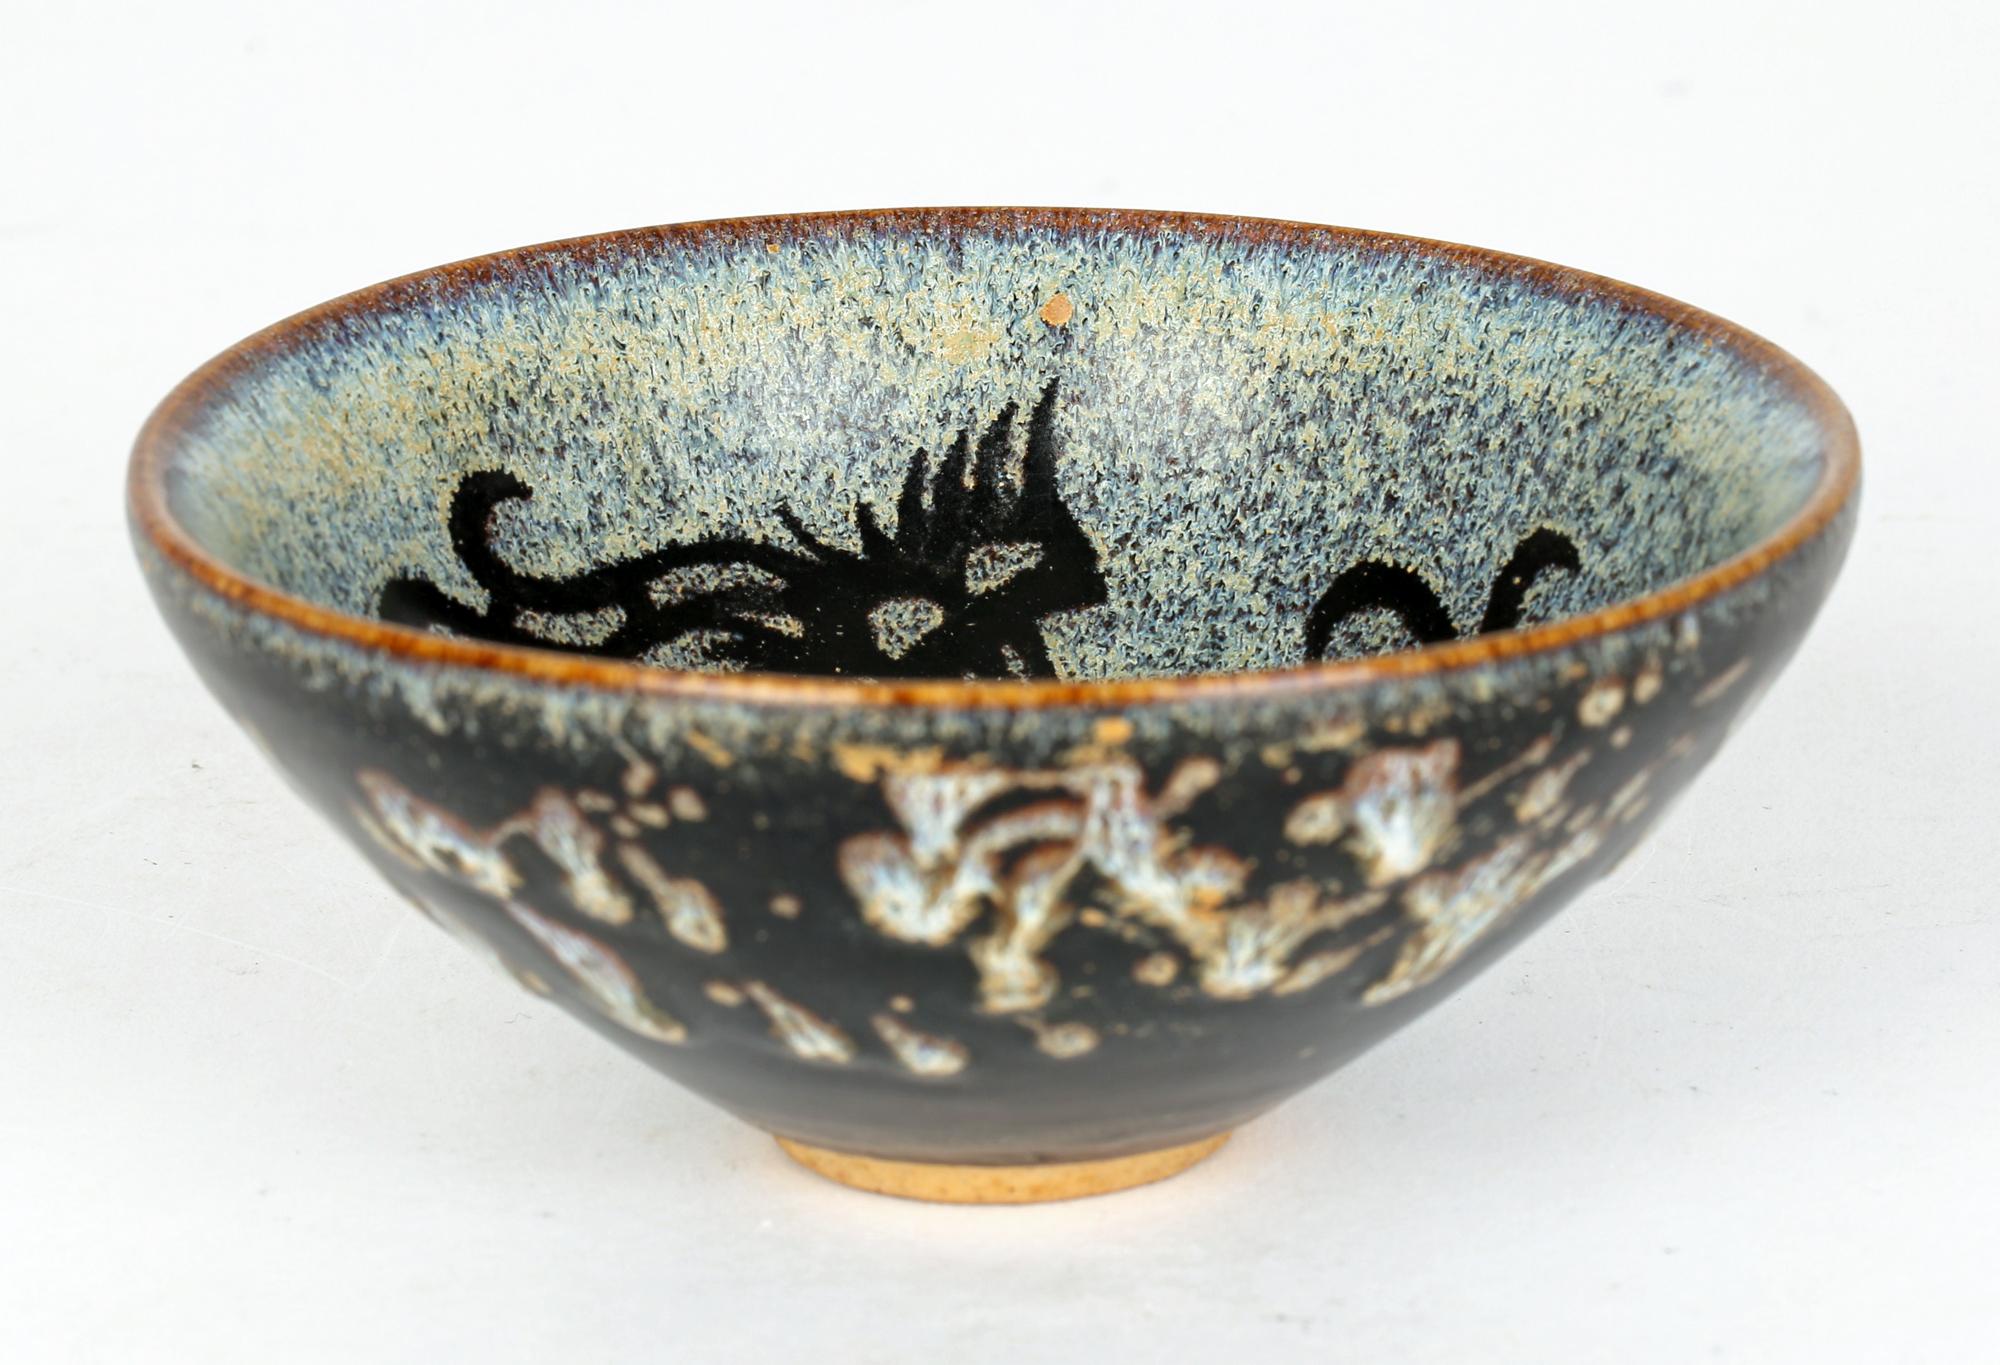 A very impressive and stylish Chinese glazed pottery tea bowl decorated with ho-ho birds in the Jian Ware style and believe to date from the 20th century or possibly earlier. The round tea bowl stands on a narrow round unglazed foot and is finely